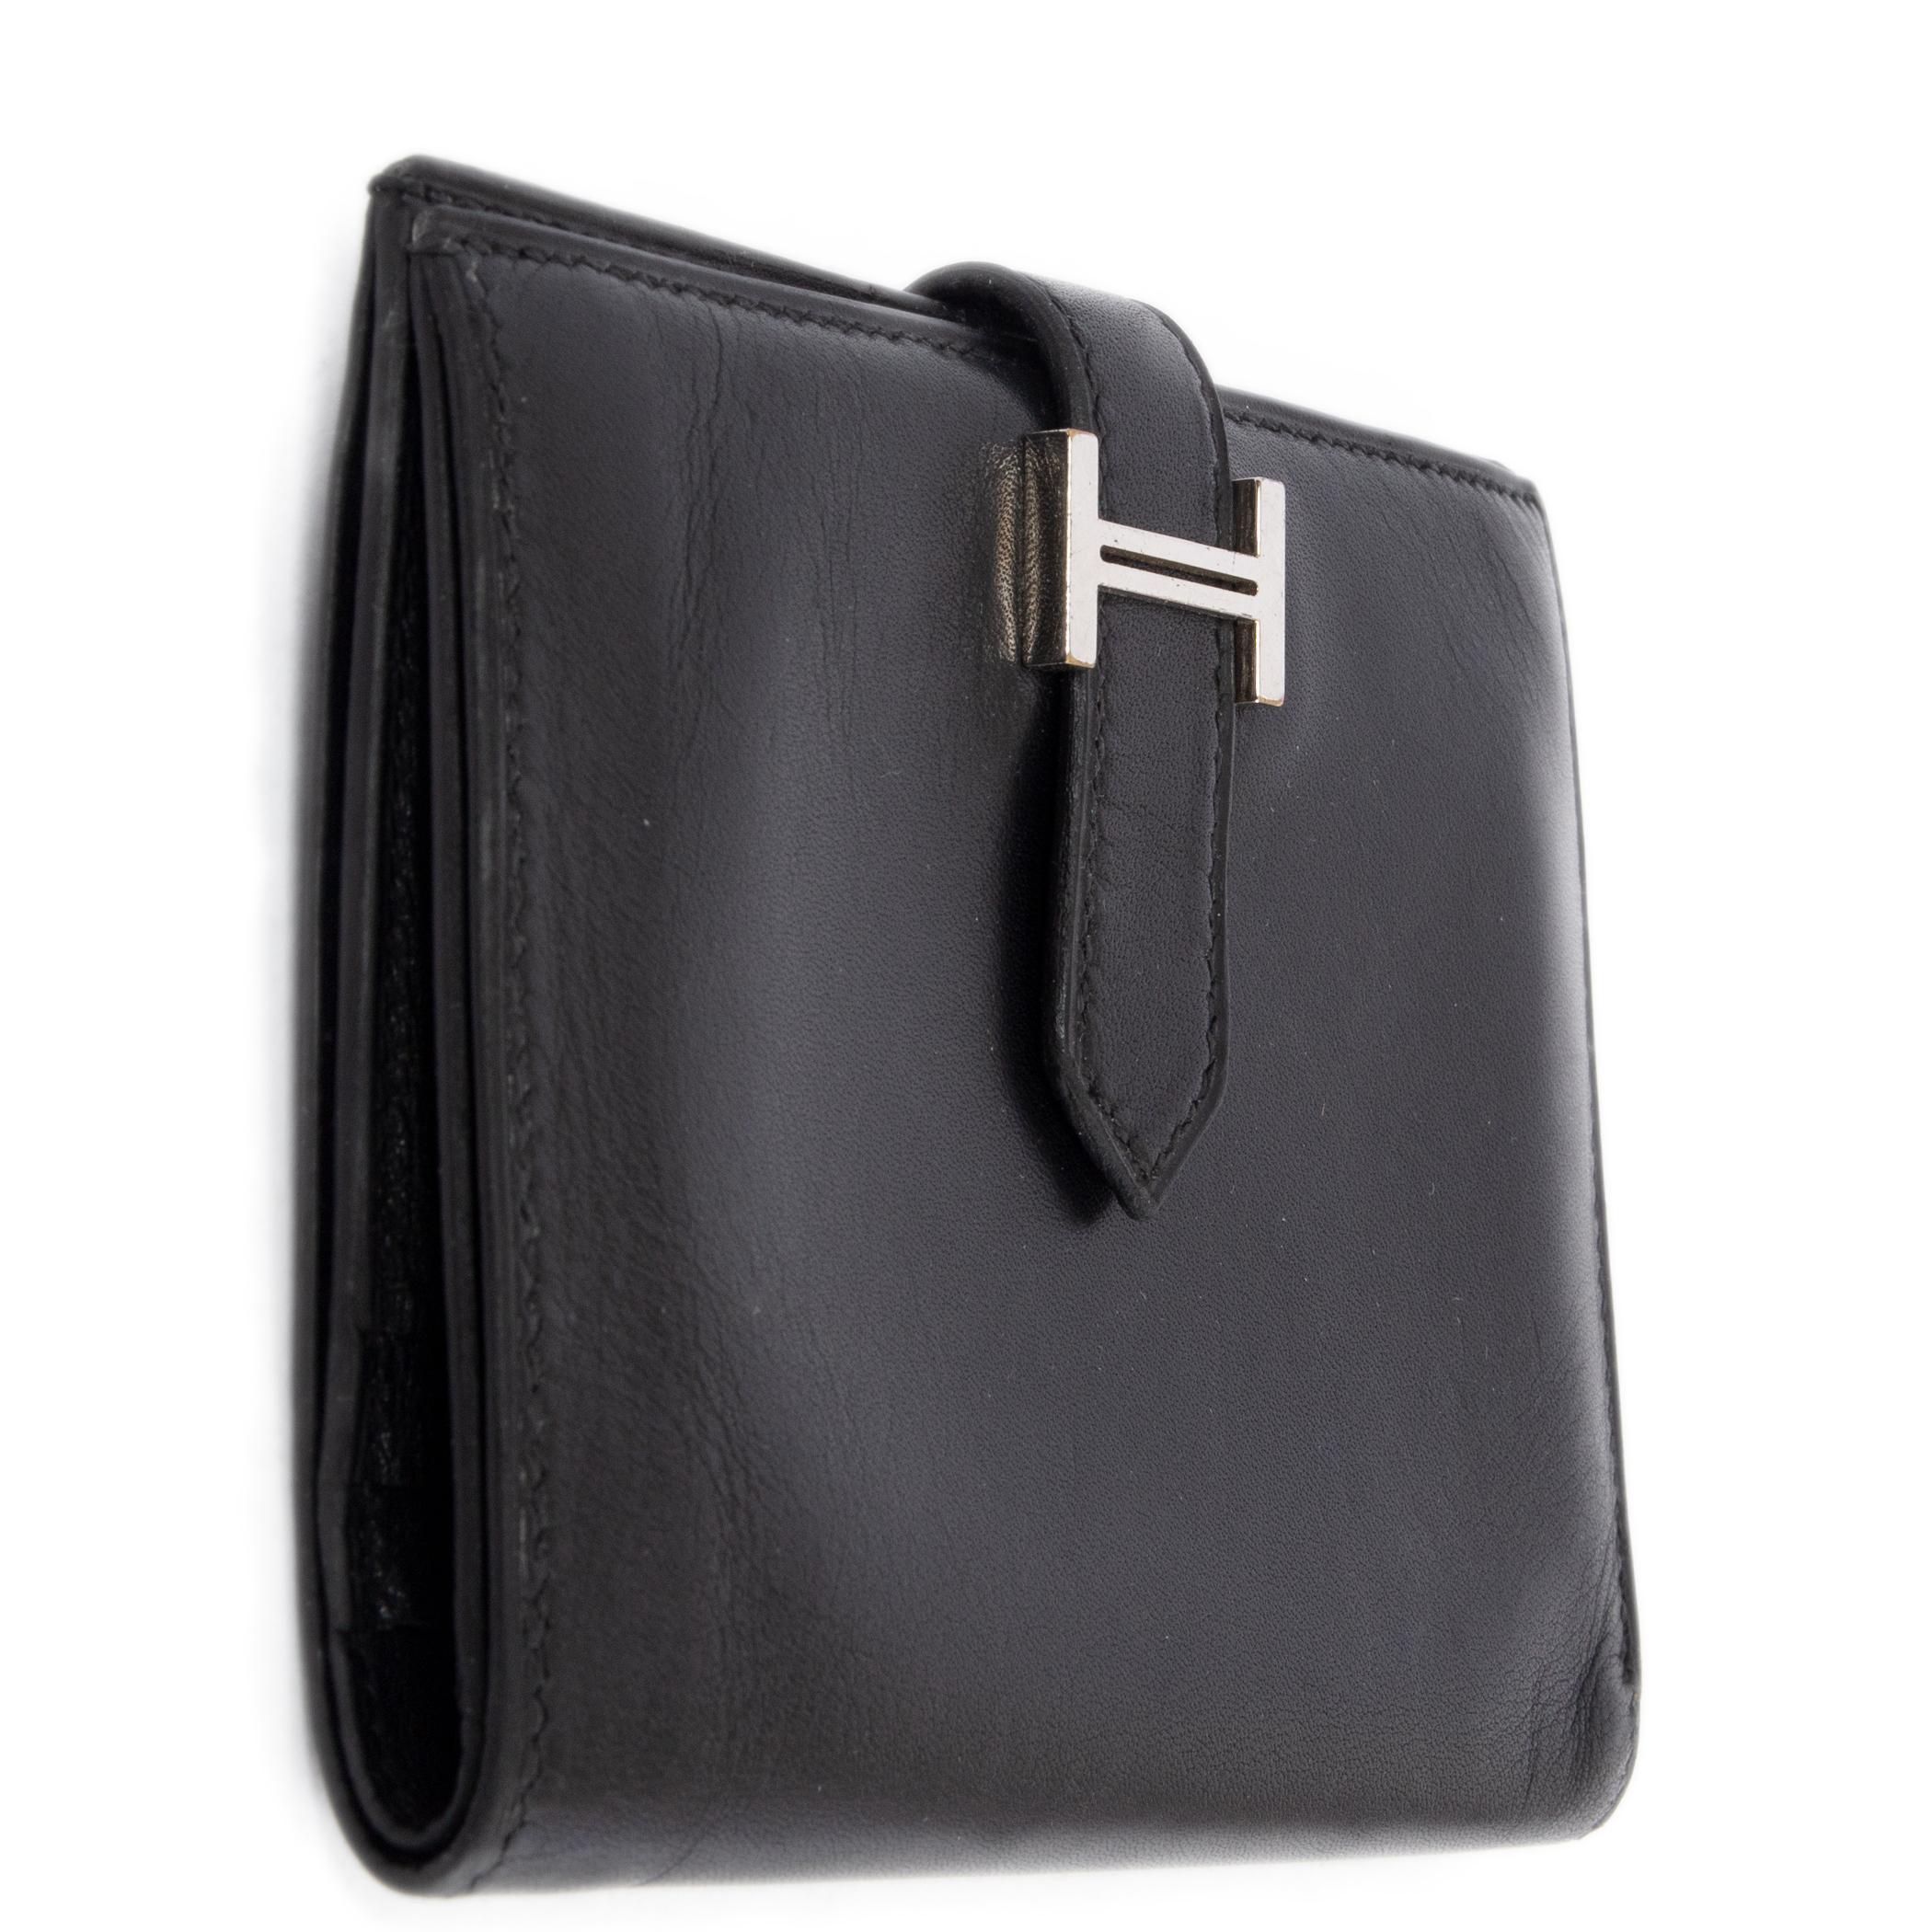 100% authentic Hermès Béarn Portefeuille Compact in black smooth Miroir leather and palladium hardware. Opens to an interior with 4 credit card slots, a zipped coin pocket and 2 flat open pockets. Has been carried often and shows softening and